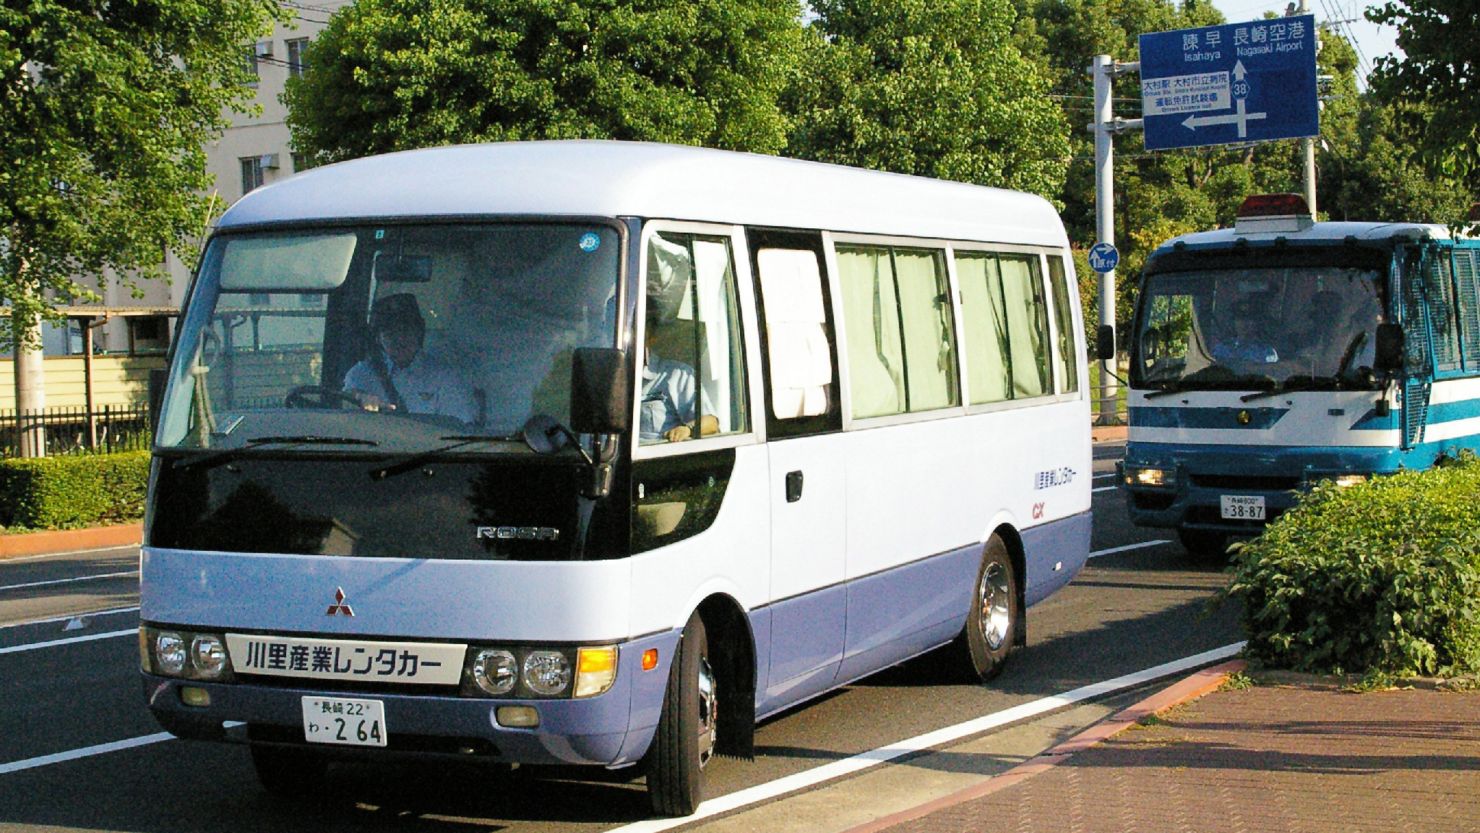 A bus carrying North Korean defectors arrives at an immigration center at Omura city, Japan on September 14, 2011.